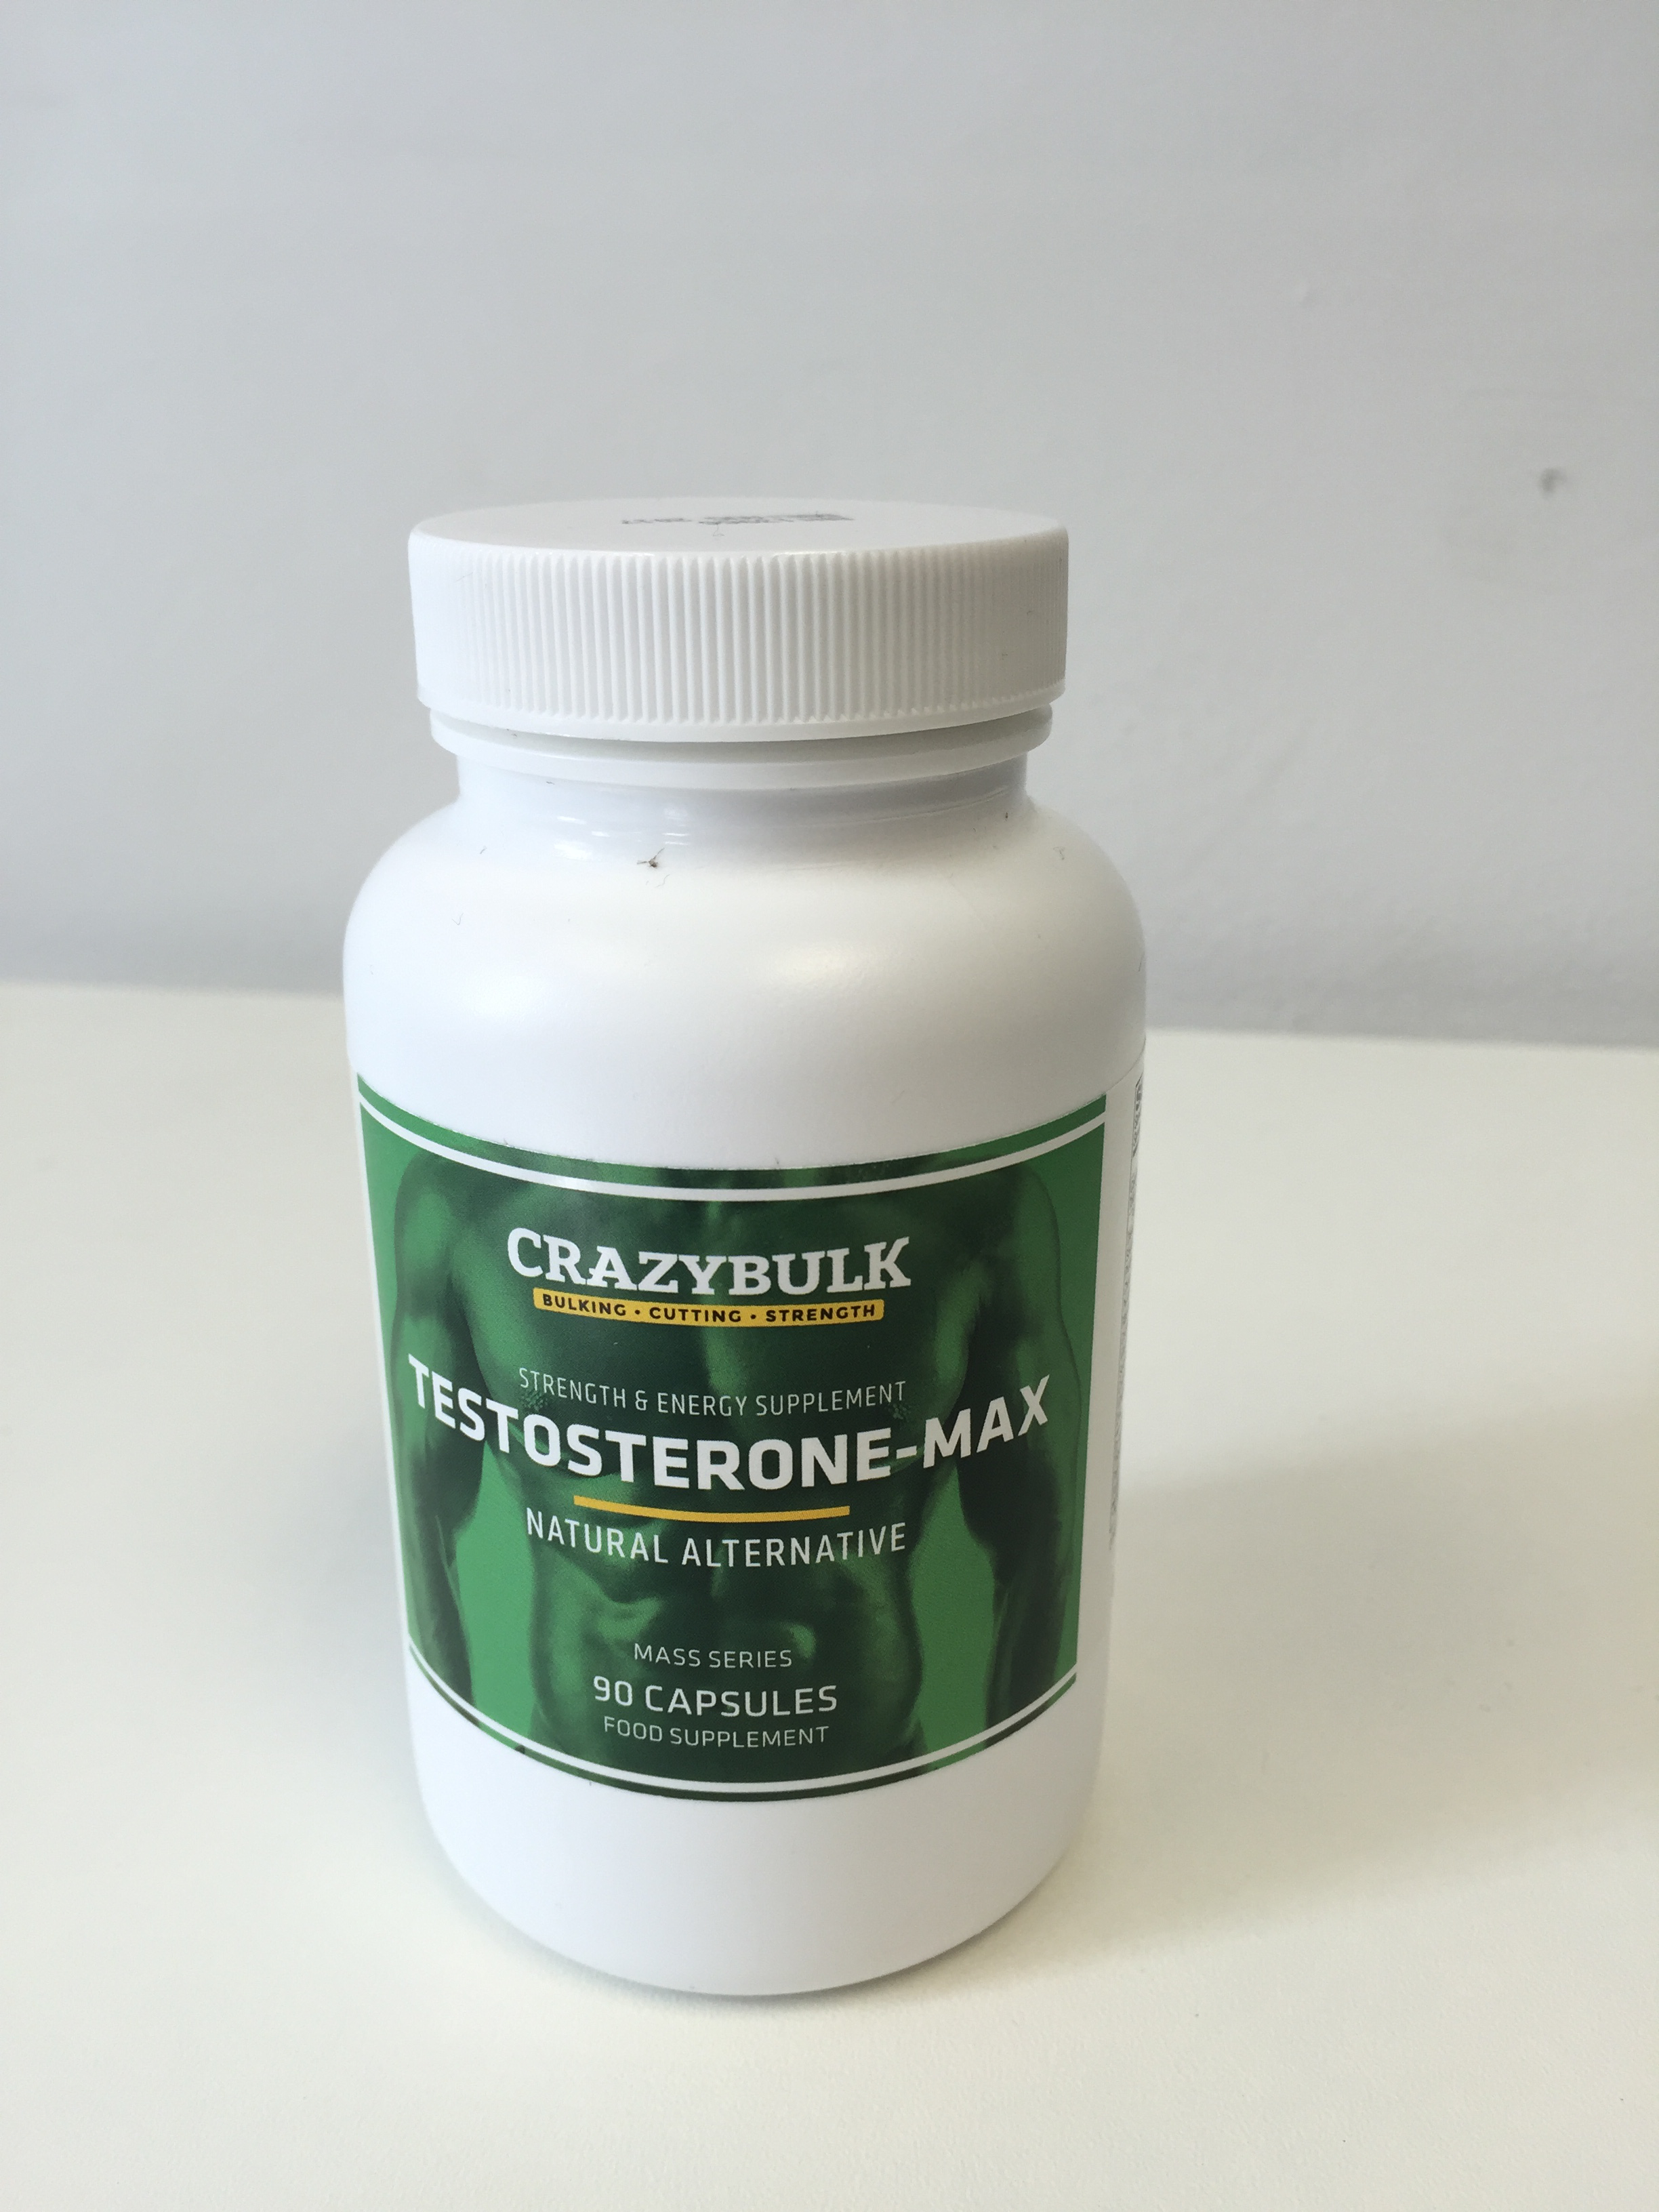 How do you lose weight while on prednisone